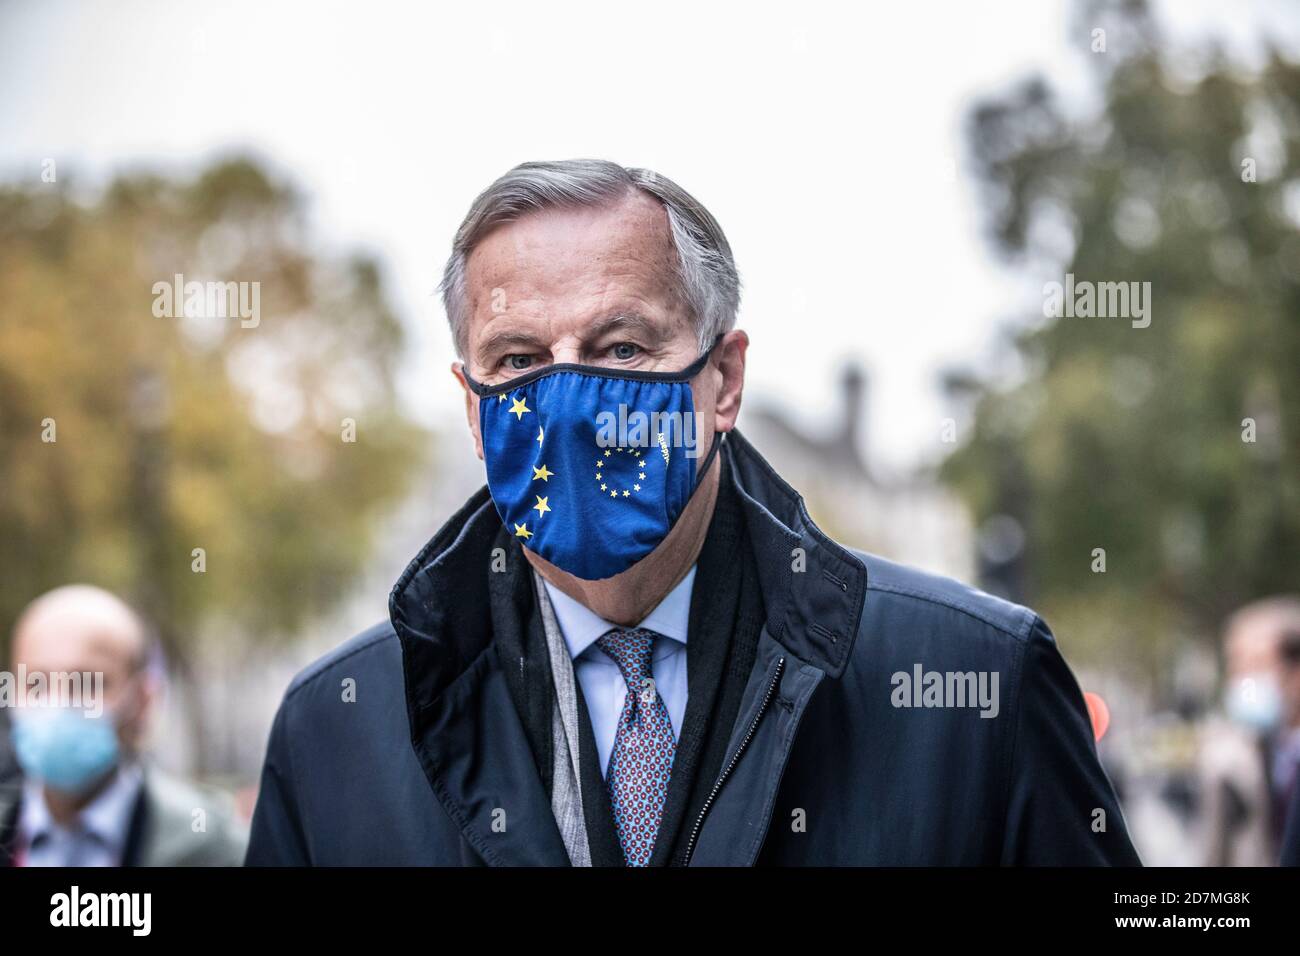 London, UK. 24th Oct, 2020. Michel Barnier arrives in Westminster for Brexit talks, Brexit Trade talks continue in London as the EU's Michel Barnier arrives at the IVS Conference Centre, No.1 Victoria Street today. Credit: Clickpics/Alamy Live News Stock Photo